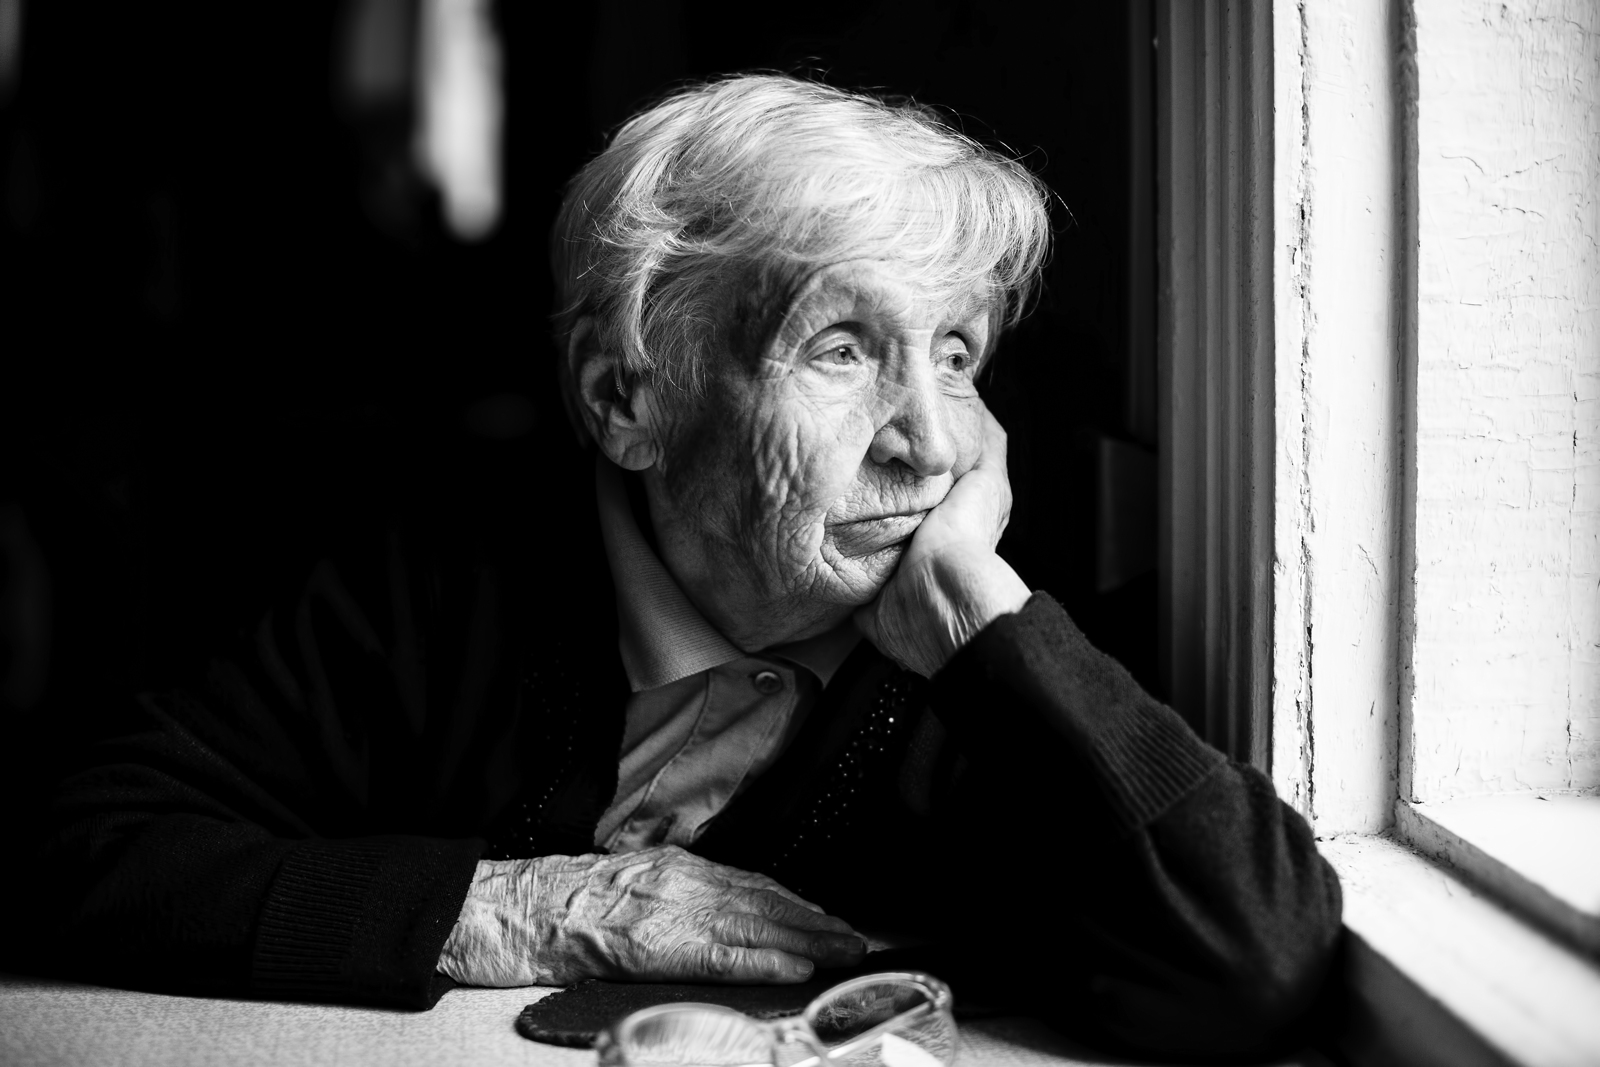 Elderly woman sadly looking out the window, a black-and-white ph